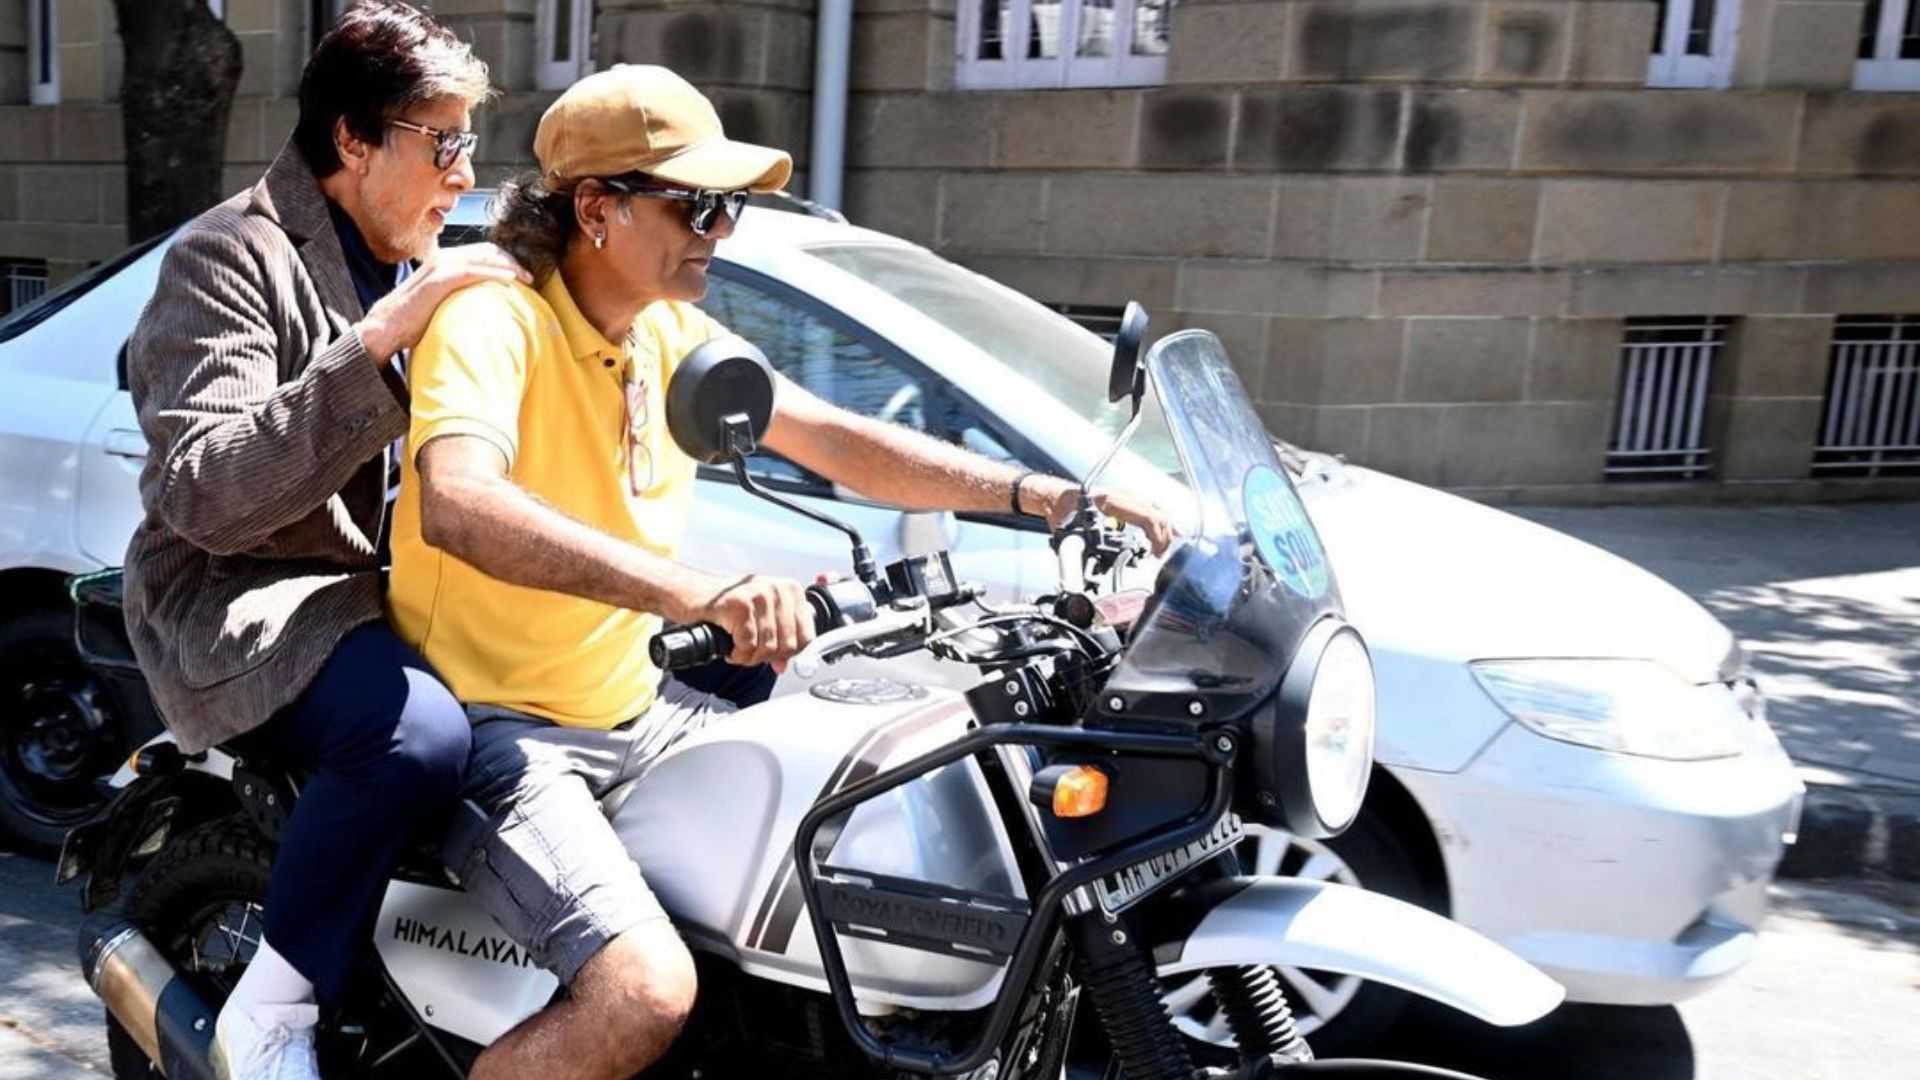 'This guy ain’t gonna be sleeping for nights': Amitabh Bachchan hitches a ride from a stranger, netizens react